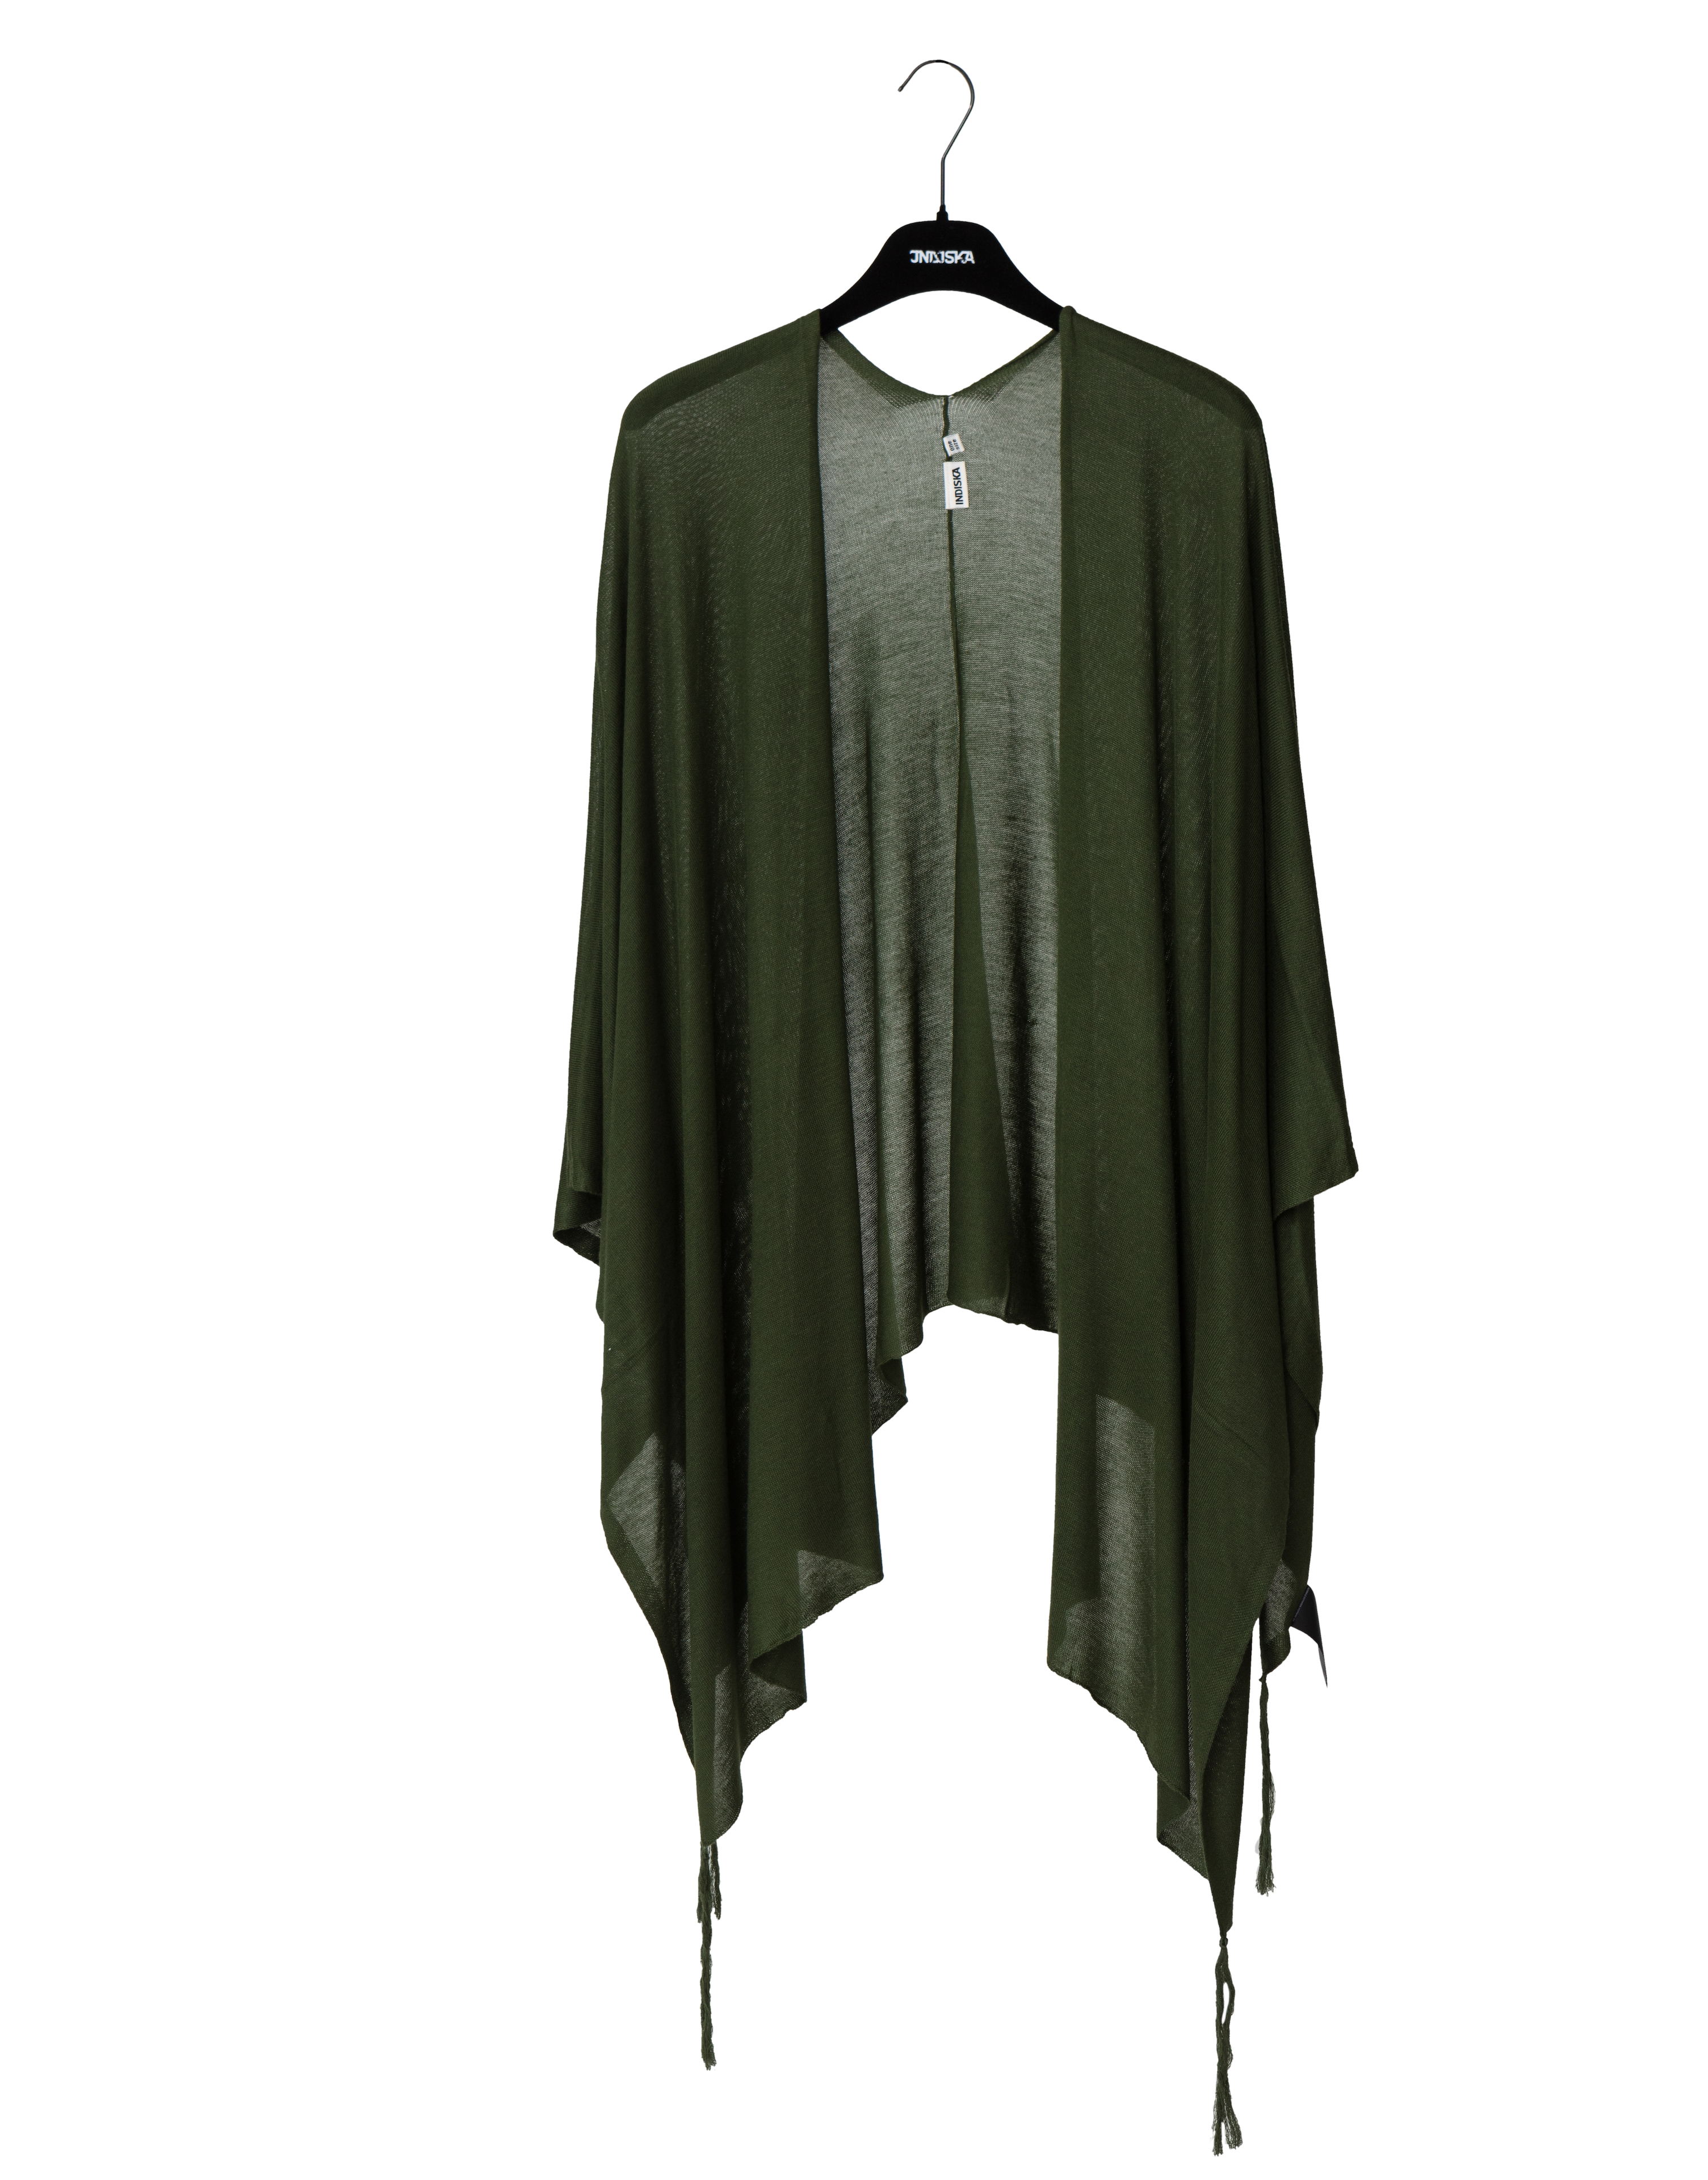 Poncho with tassles